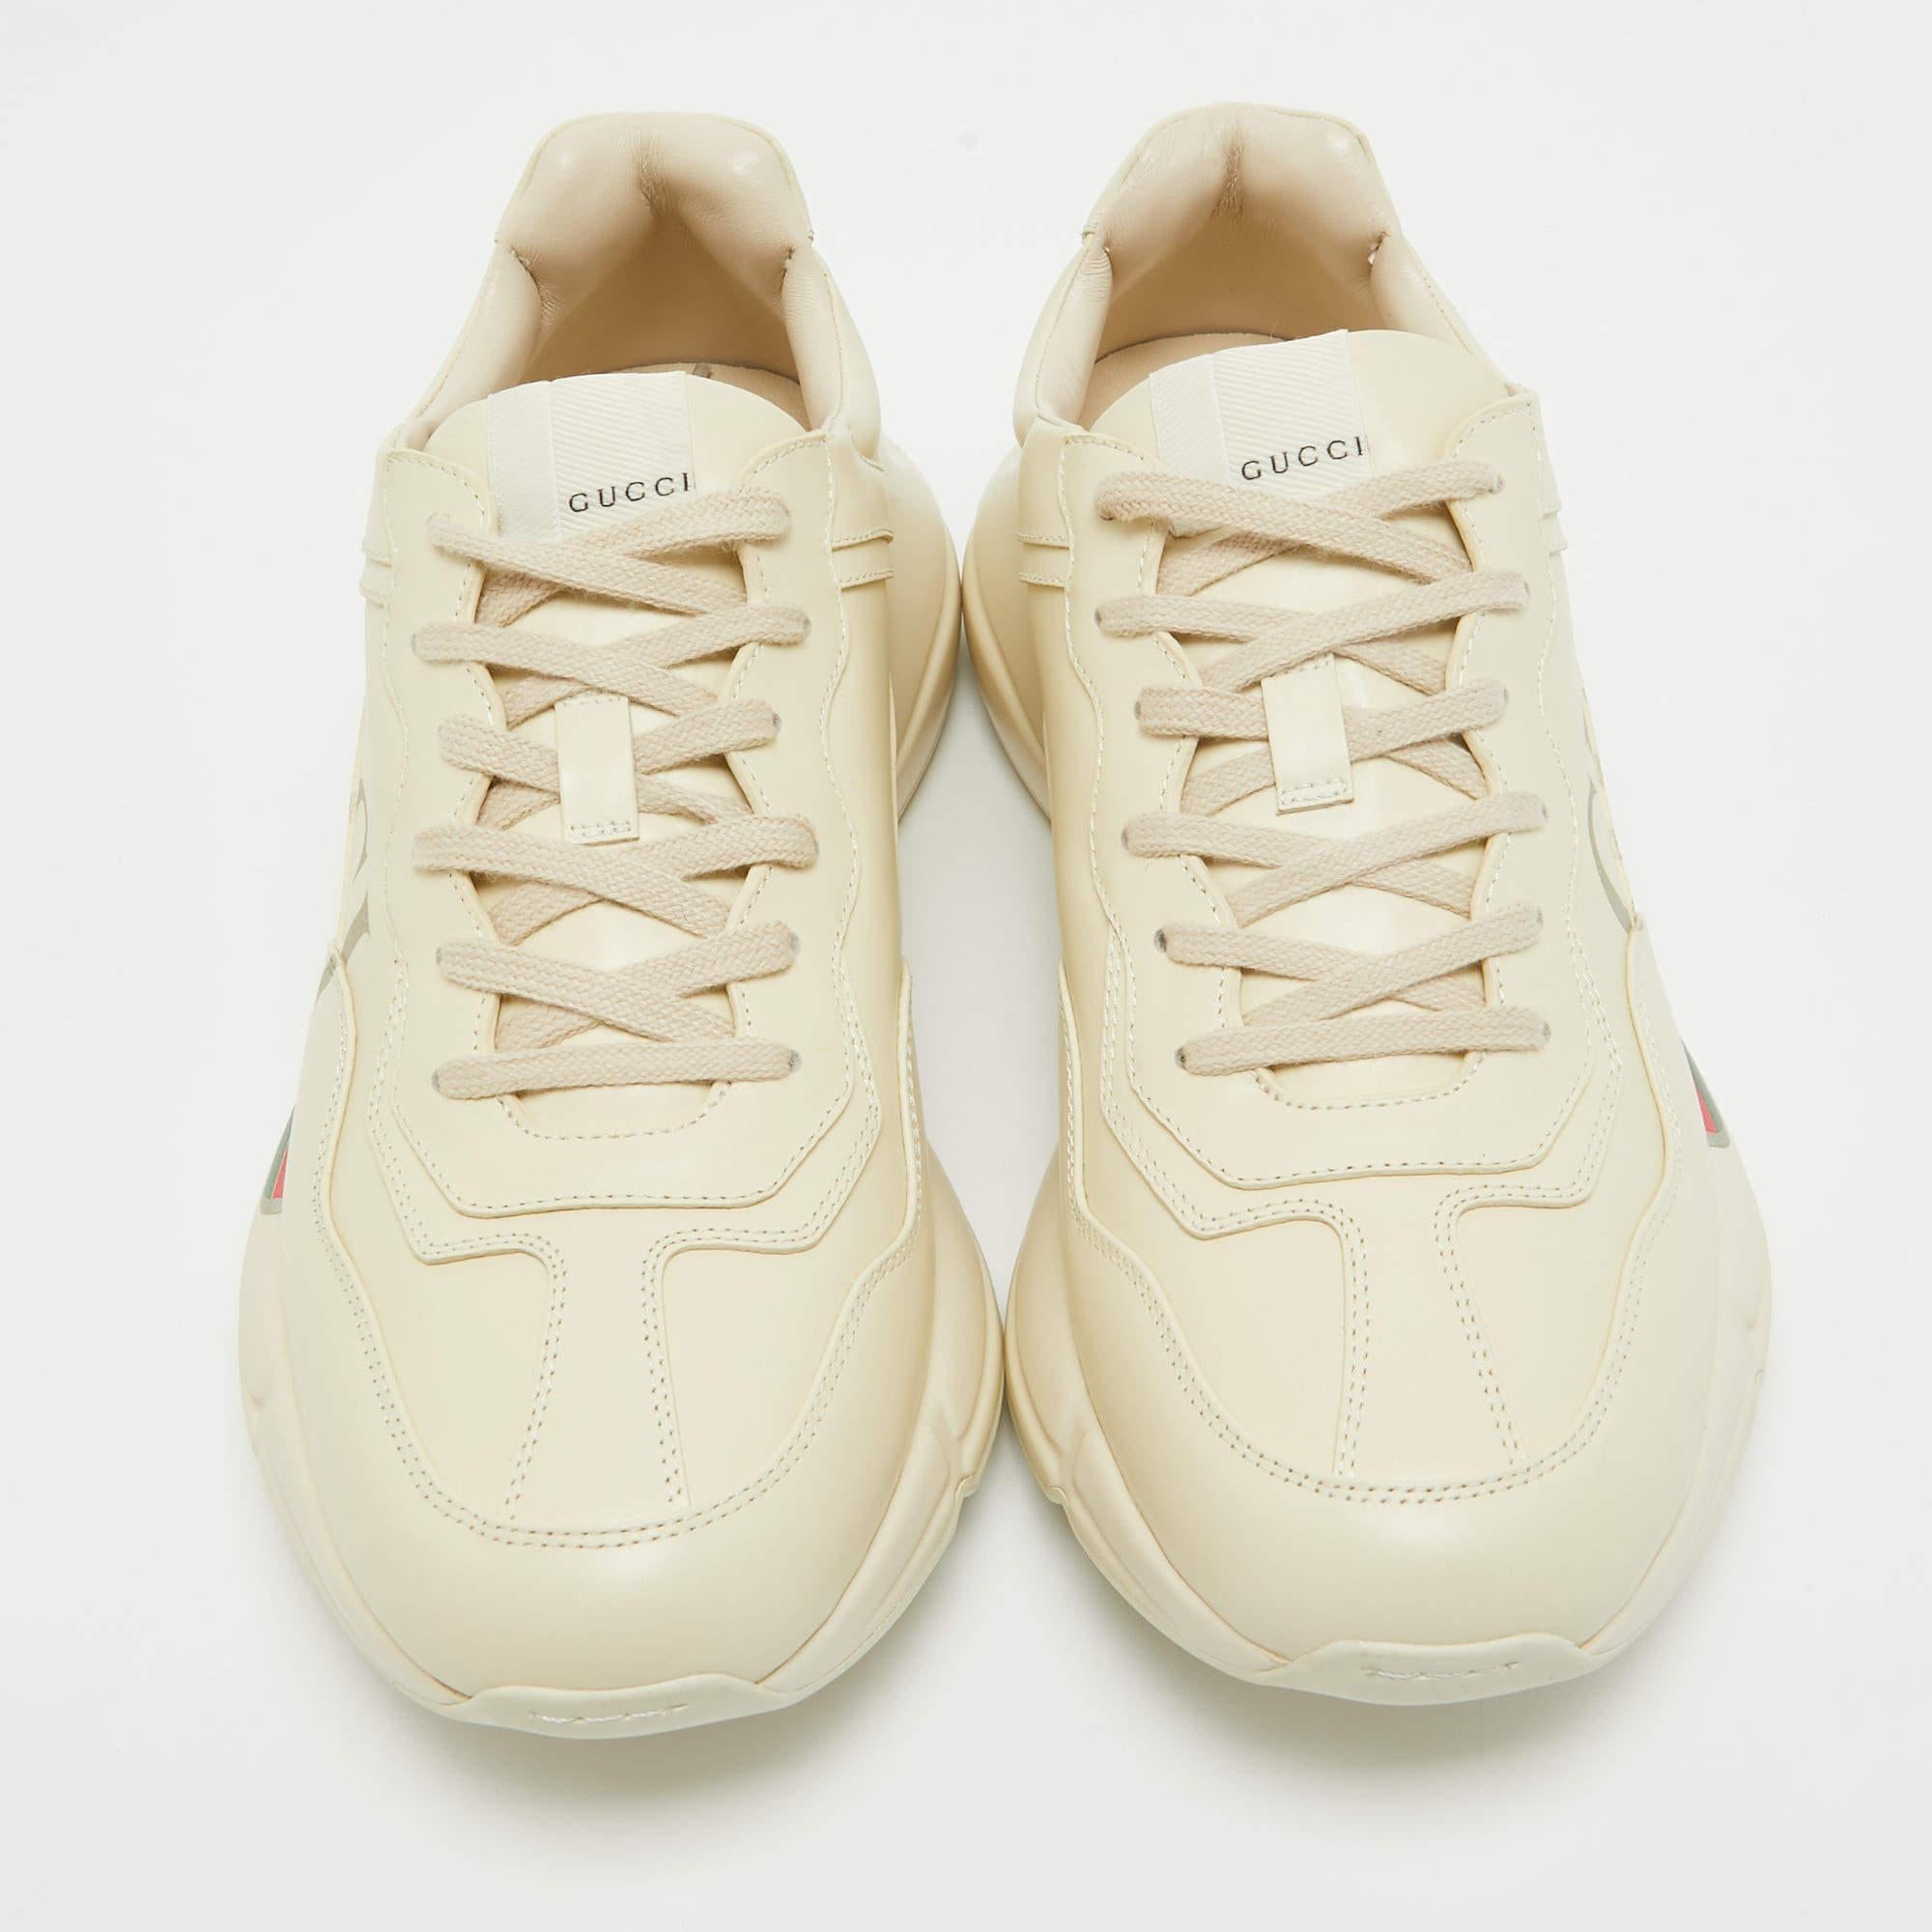 Designed into a chunky size, these Rhyton Gucci sneakers are not just stylish in appeal but also comfortable to wear. Crafted from leather, they are designed with logo prints atop a cream background on the sides. Finished off with laces on the